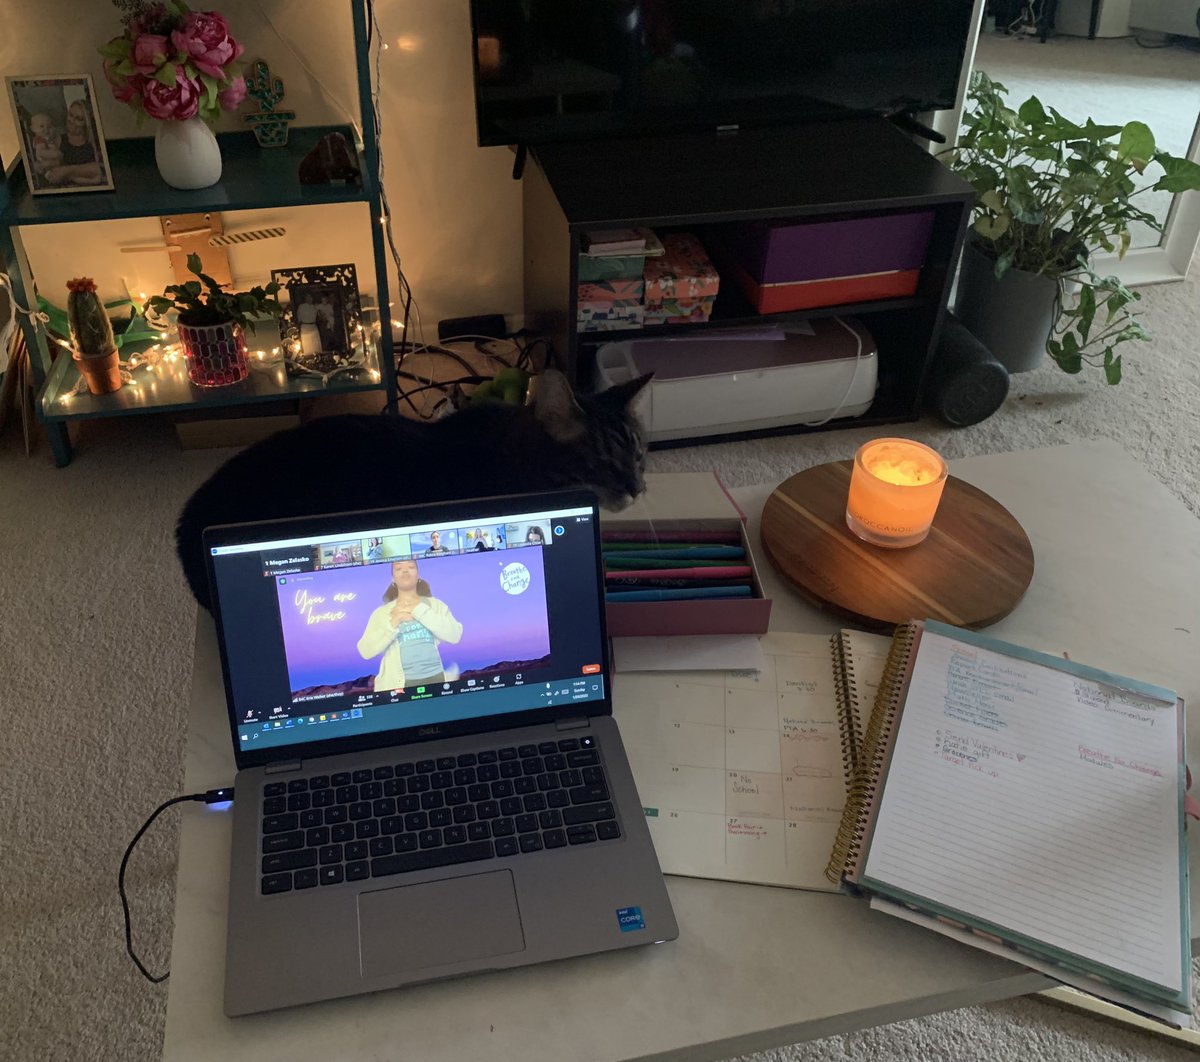 Completed my first live weekend of <a target='_blank' href='http://twitter.com/Breathe4Change_'>@Breathe4Change_</a> I can’t wait to use some of the strategies I learned in my classroom this week! ❤️🧘‍♀️ <a target='_blank' href='https://t.co/Af7Hrgennx'>https://t.co/Af7Hrgennx</a>